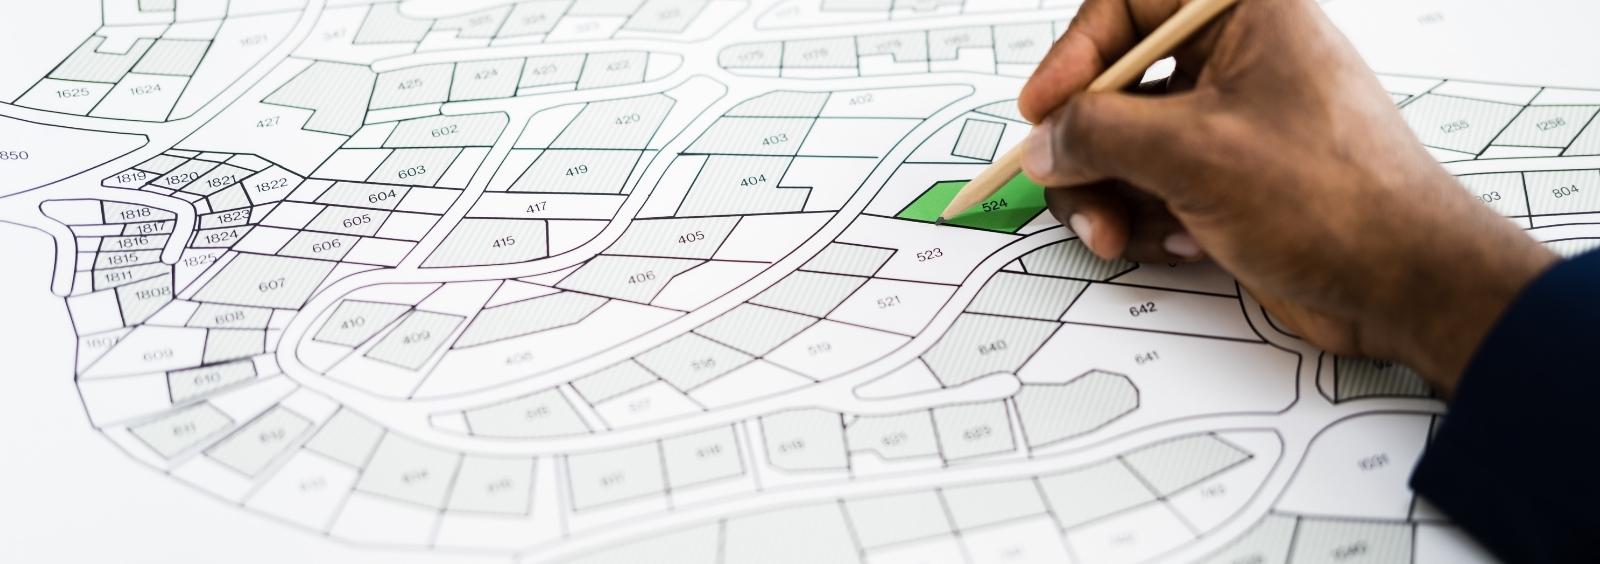 Picture of a planning map with someone gridding out plots.